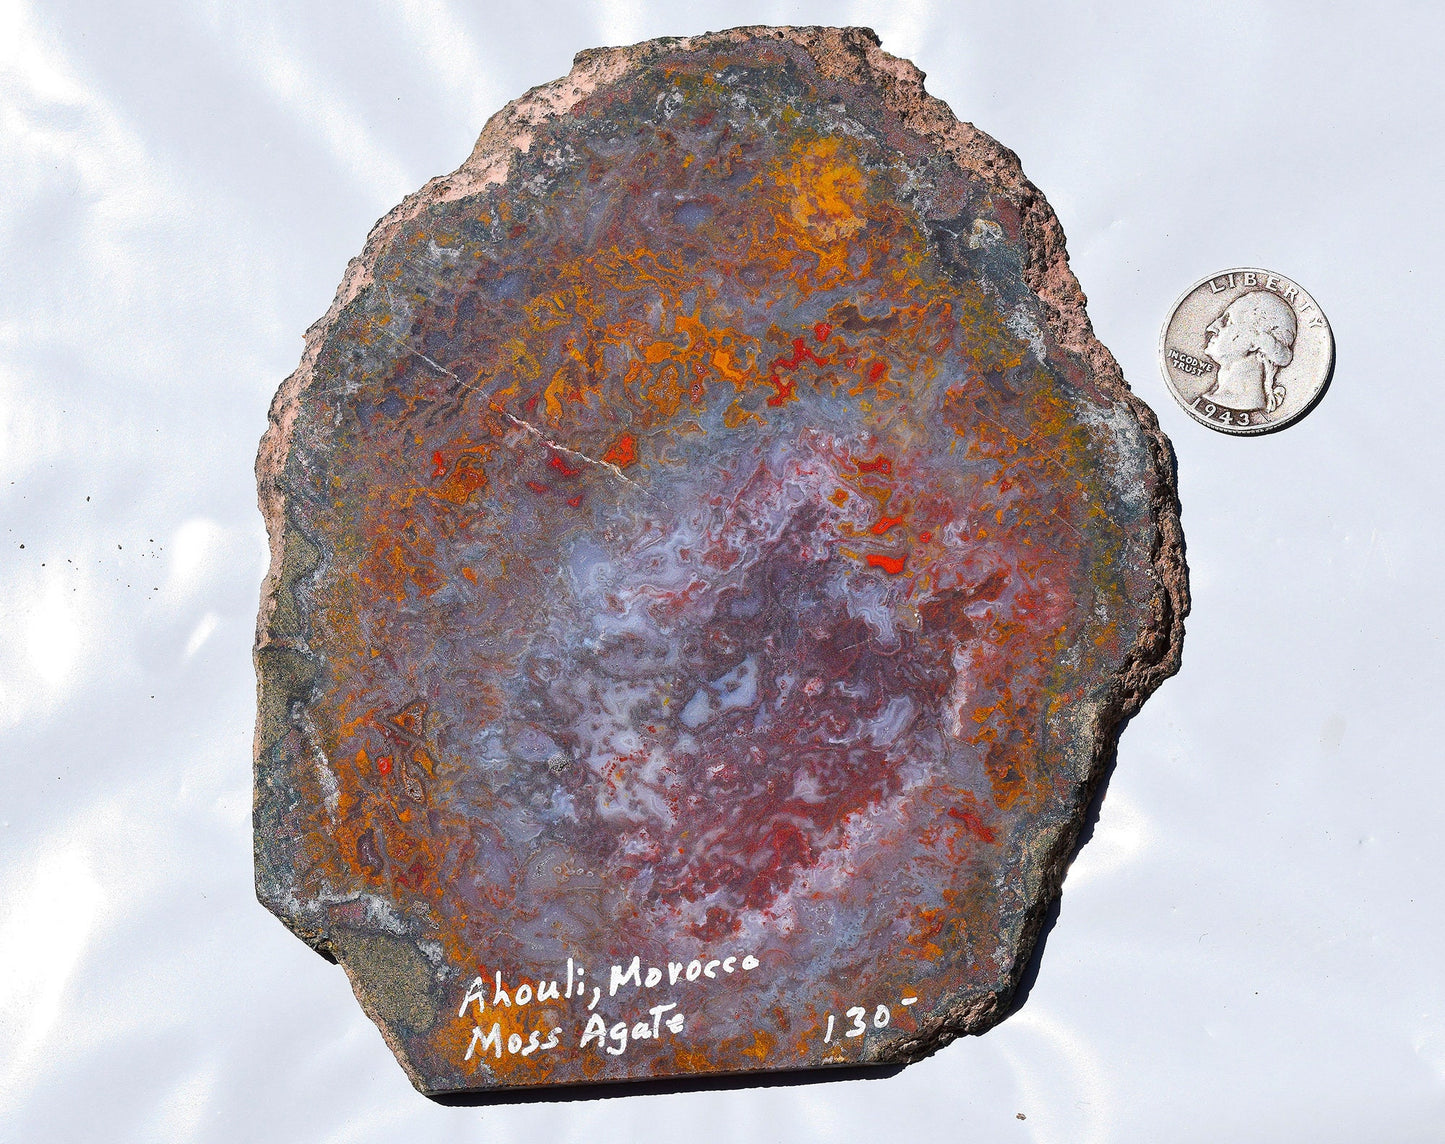 Rare, multi-colored moss agate from the Ahouli beds in Morocco. #2